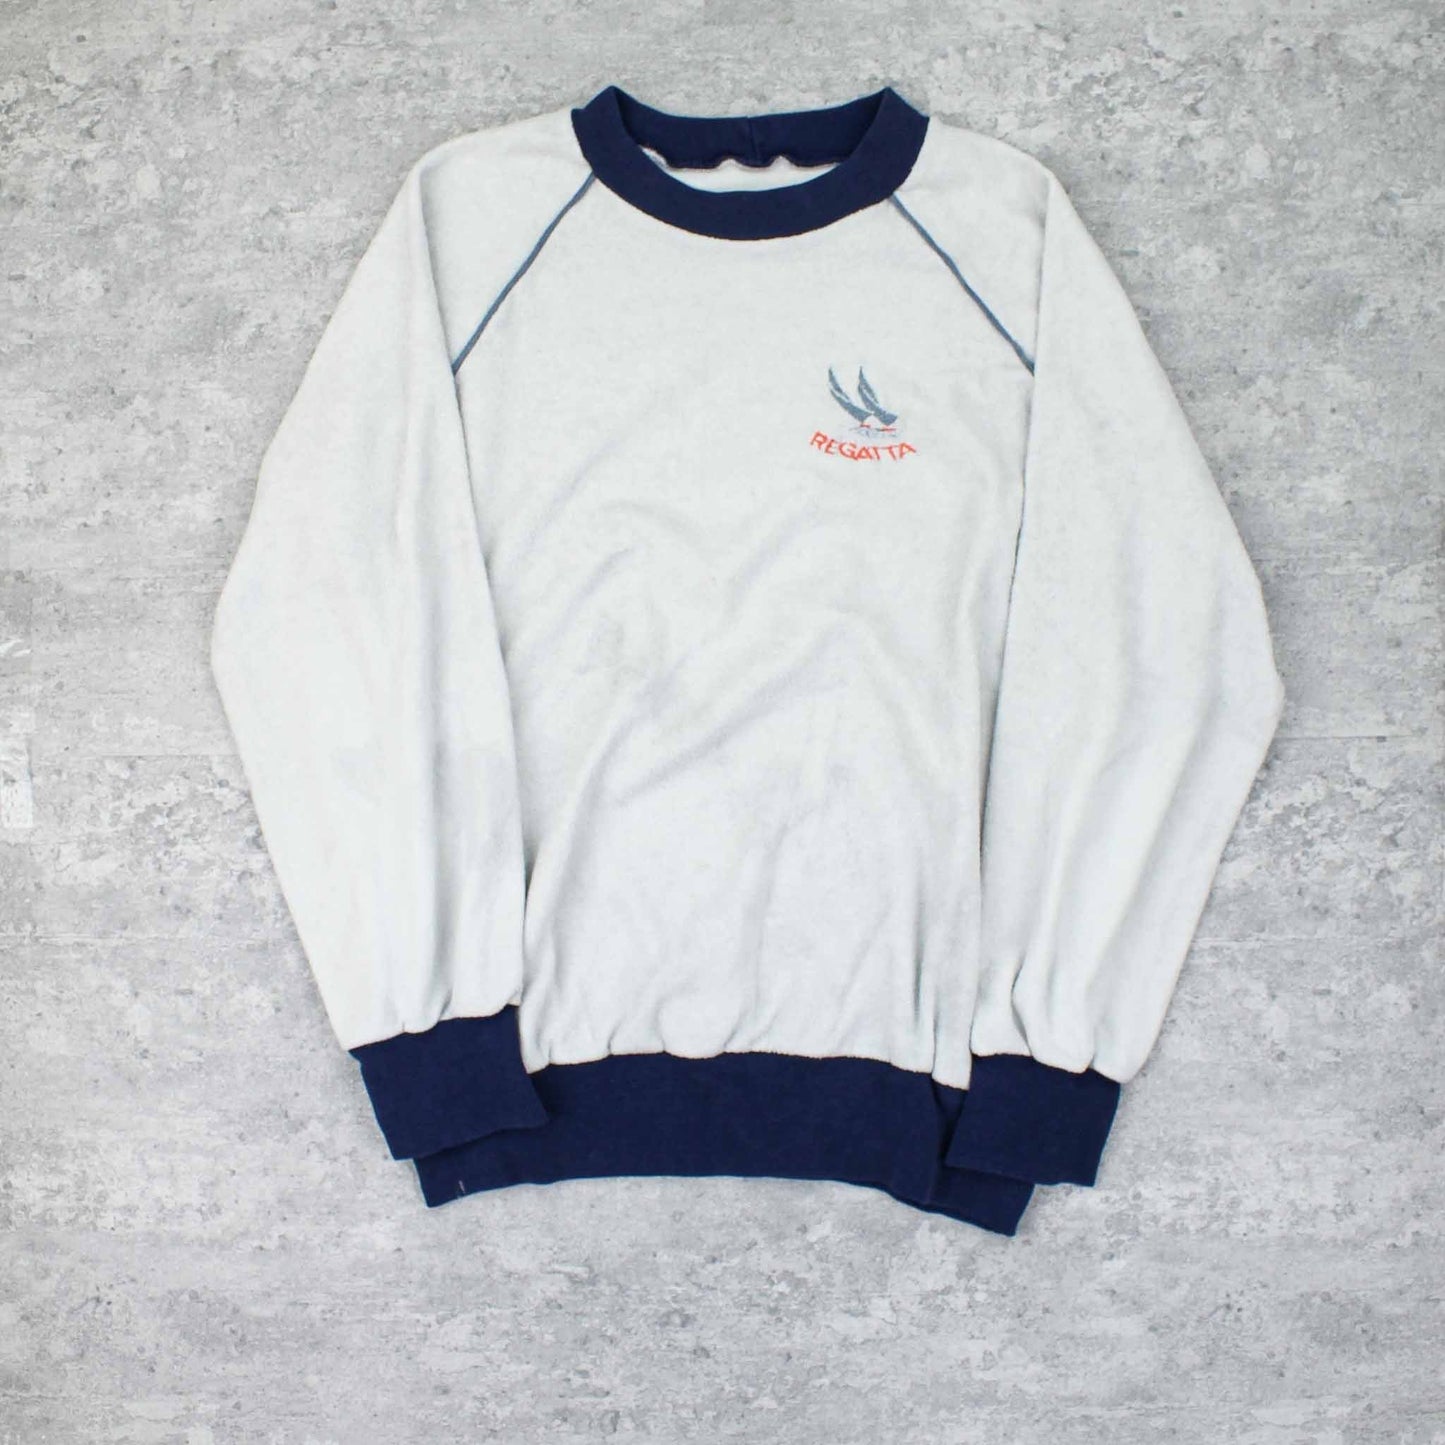 Vintage USA Spellout Sweater Weiß - S